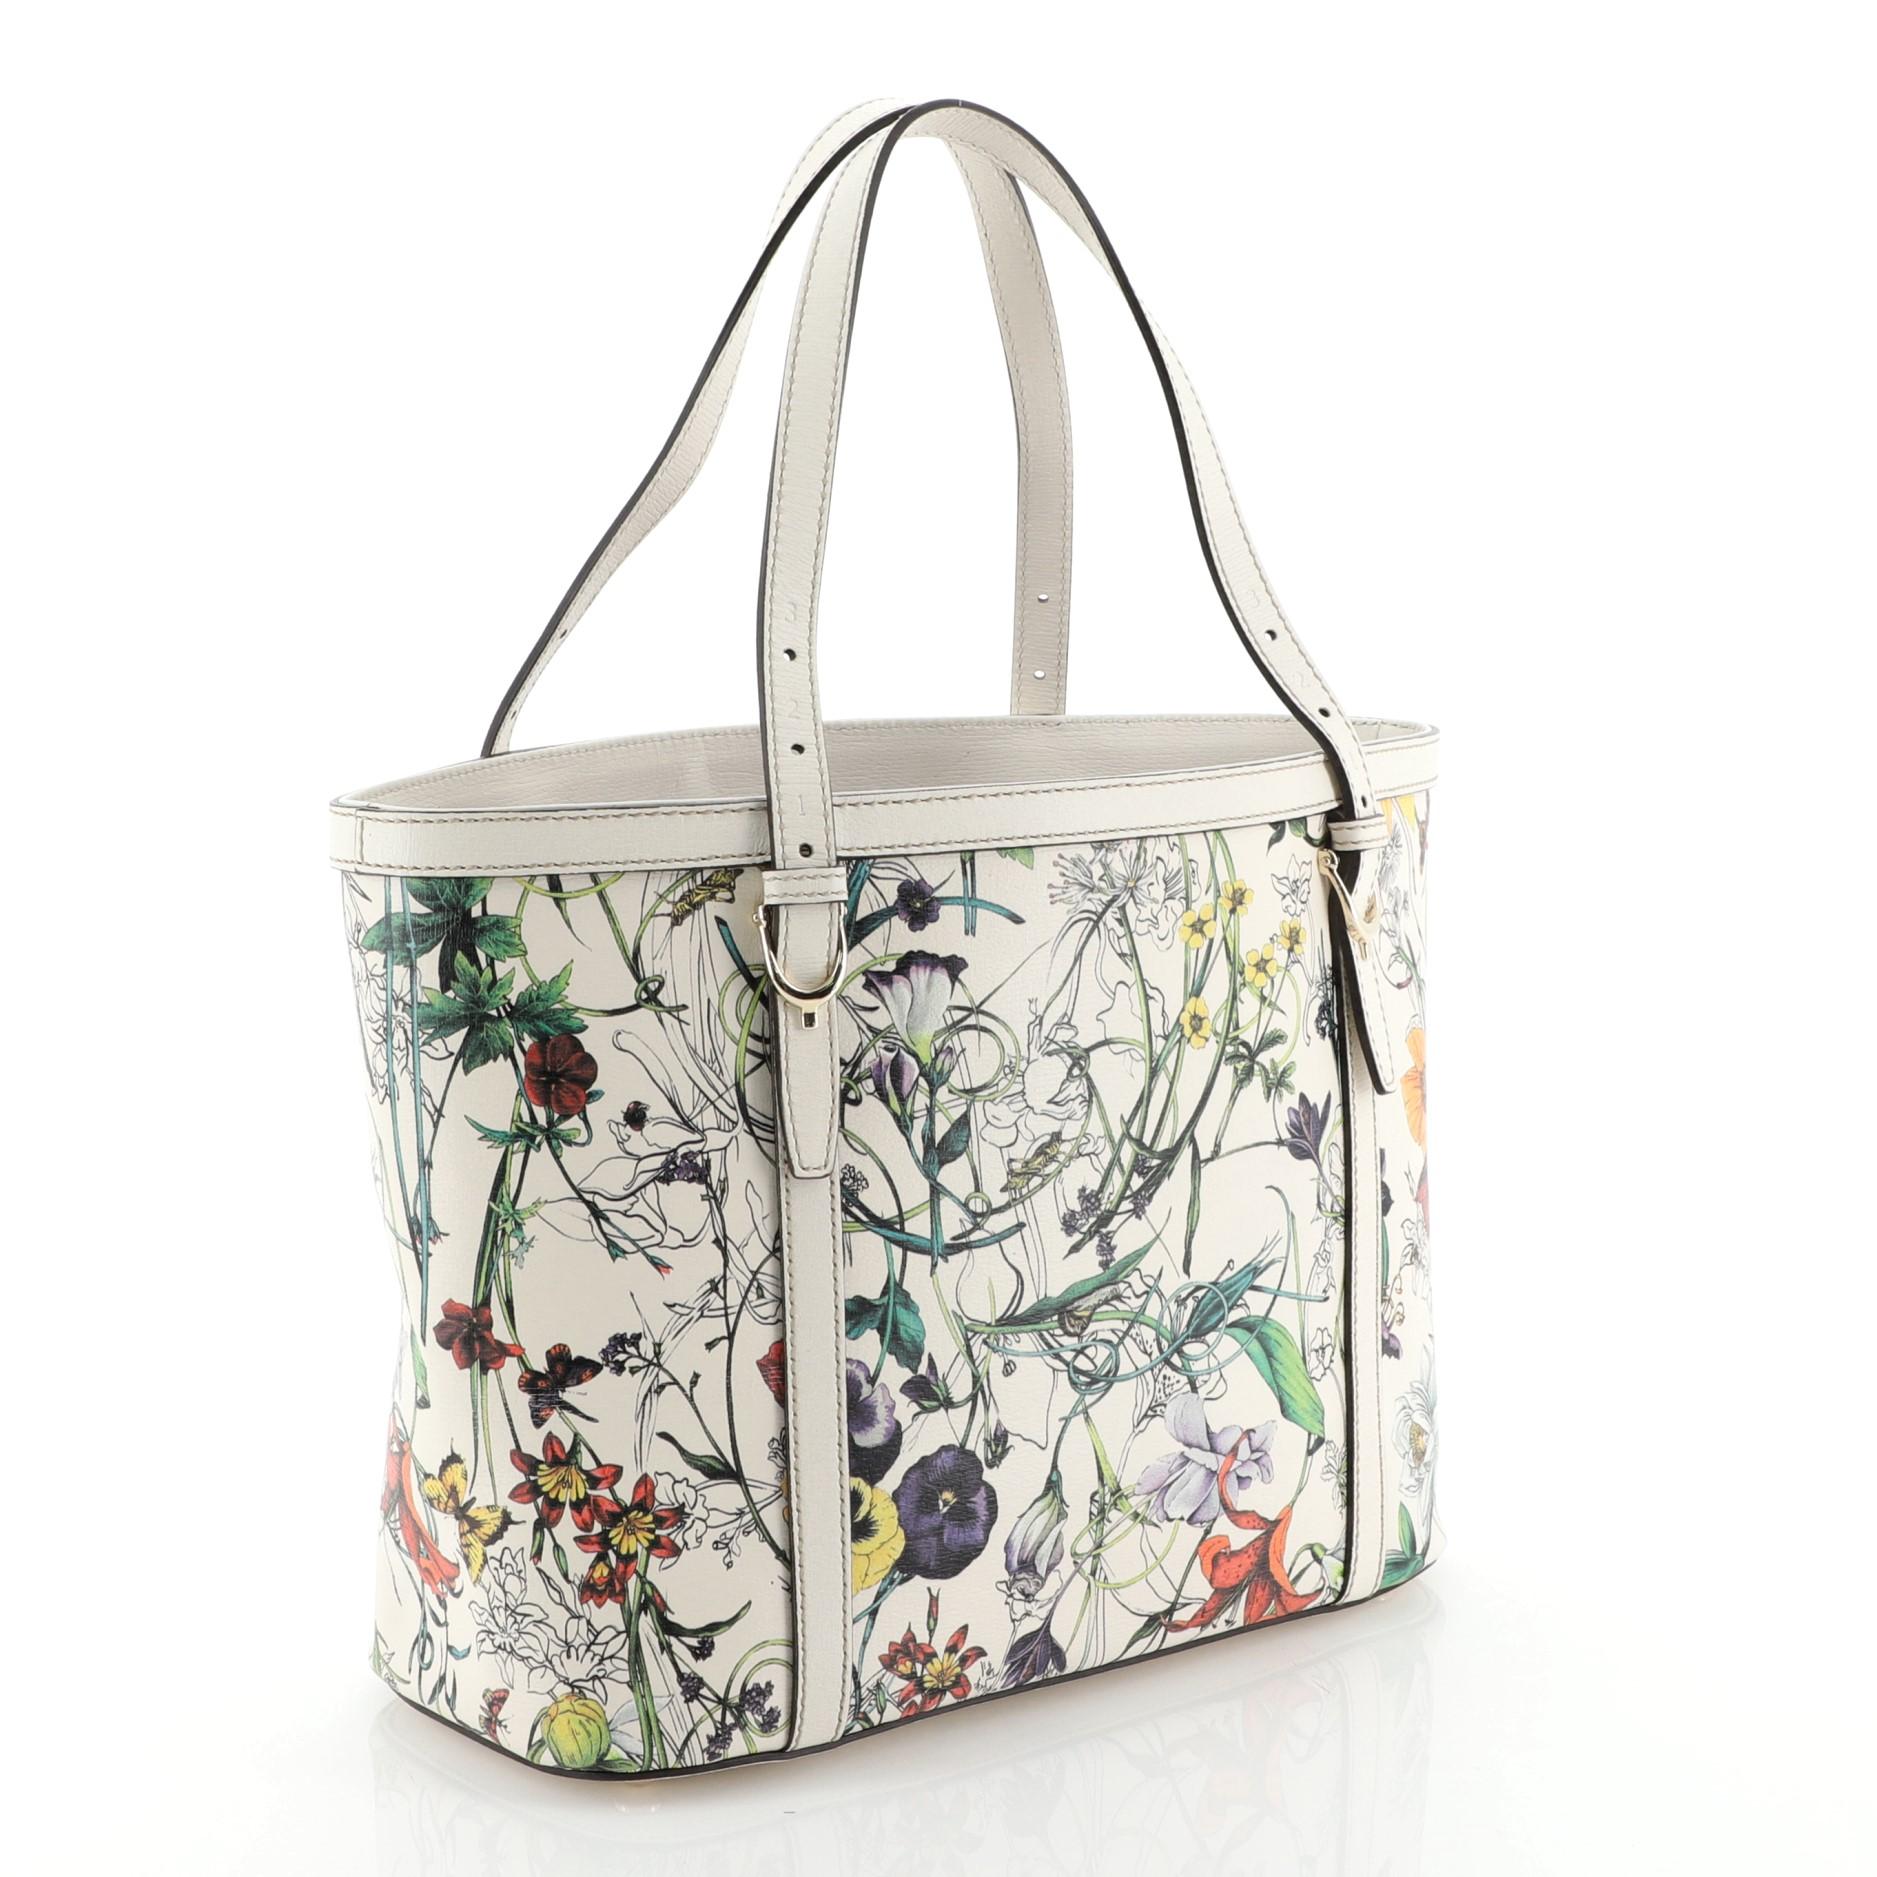 This Gucci Nice Tote Floral Printed Leather Small, crafted in white floral printed leather, features adjustable dual flat handles with spur details, leather trim and gold-tone hardware. Its hook closure opens to a purple fabric interior with side